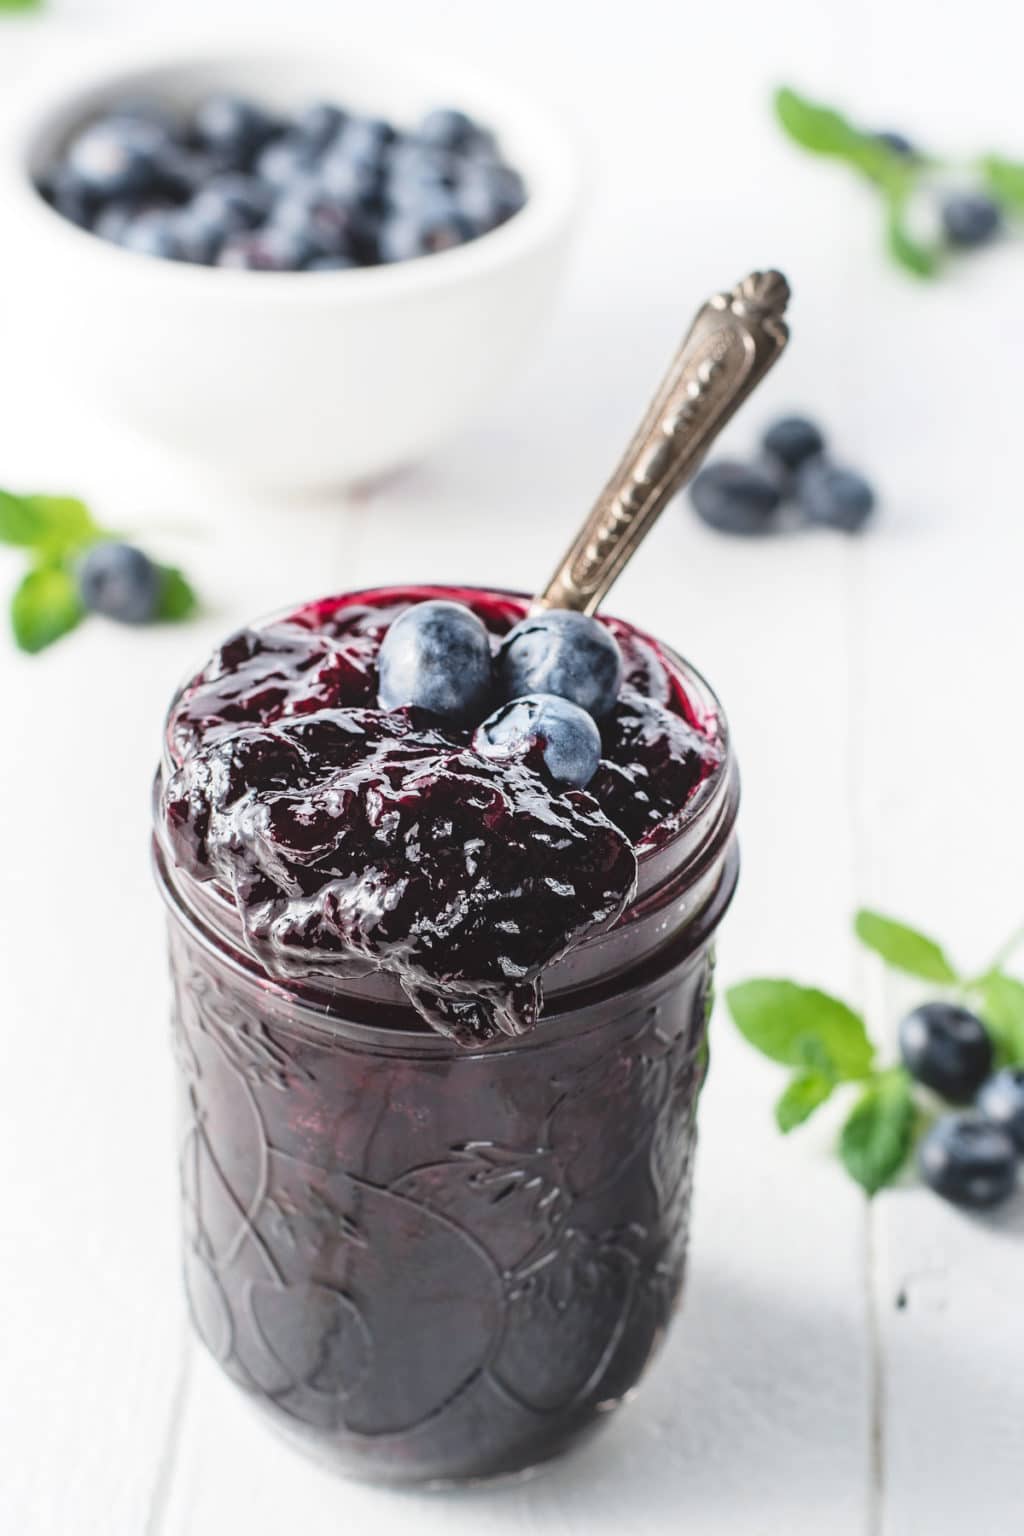 A jar of sugar-free blueberry jam with a large drip running down the side of the jar on a white background